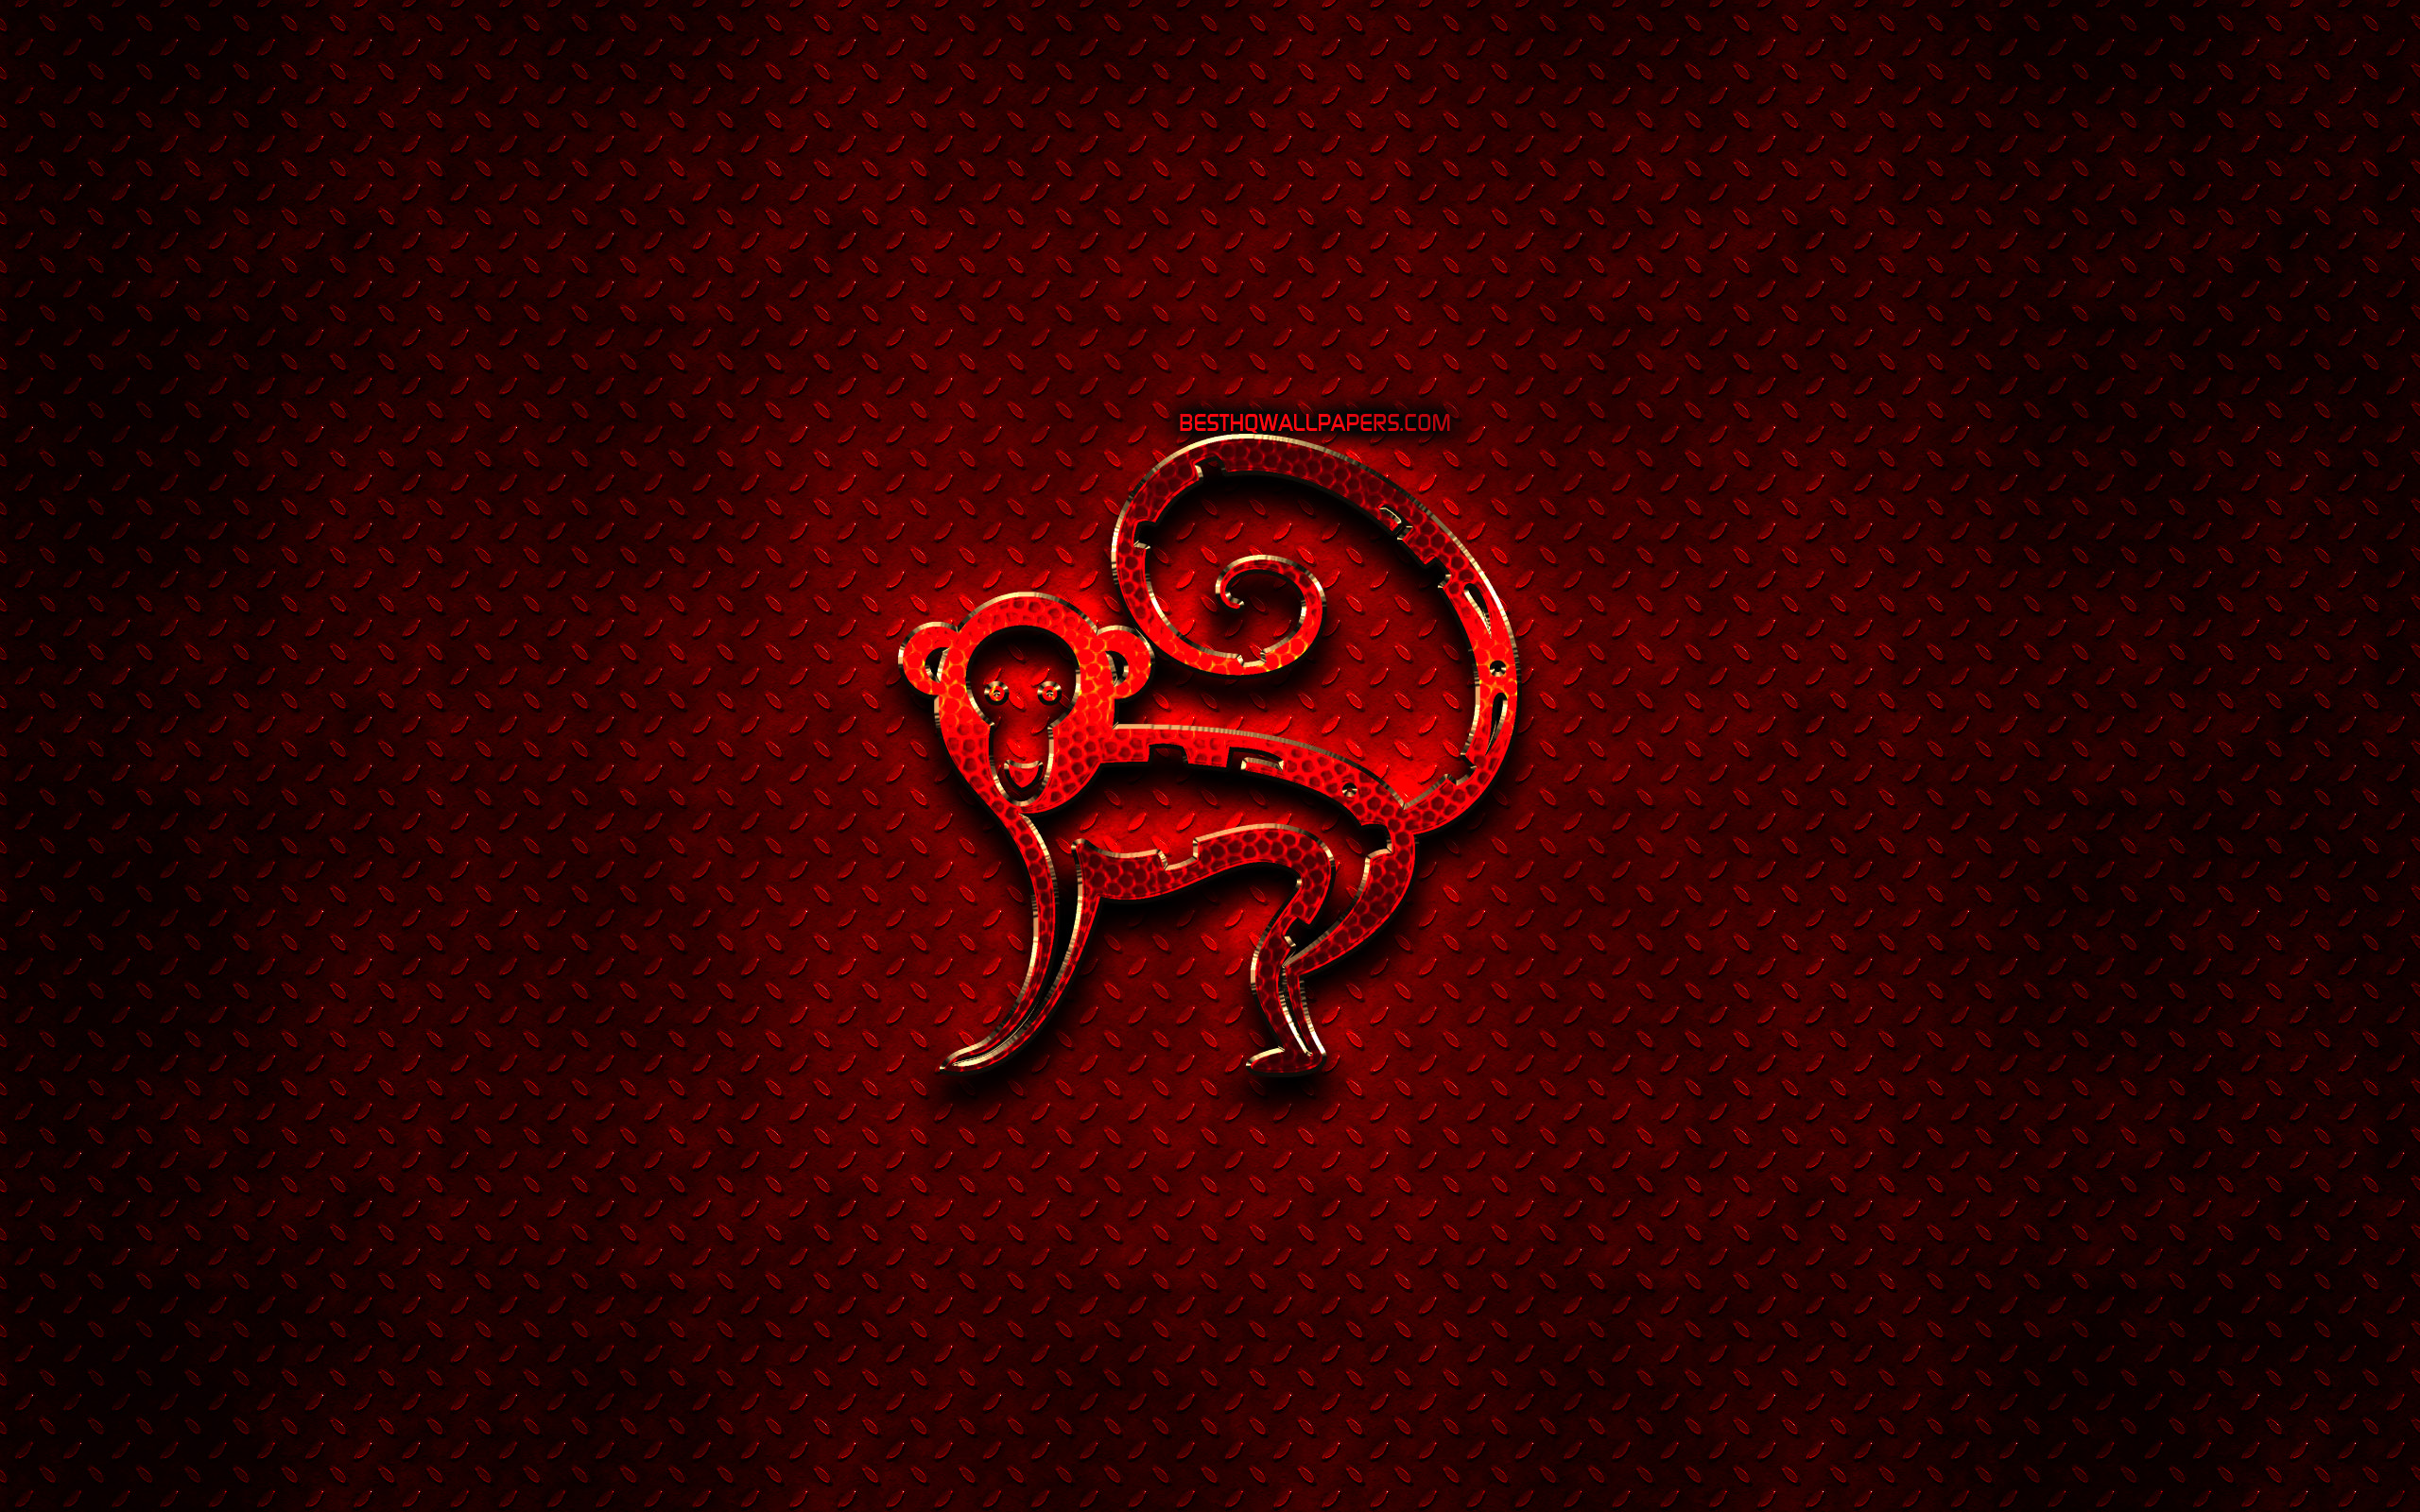 Download wallpaper Monkey, red animals signs, chinese zodiac, Chinese calendar, Monkey zodiac sign, red metal background, Chinese Zodiac Signs, animals, creative, Monkey zodiac for desktop with resolution 2560x1600. High Quality HD picture